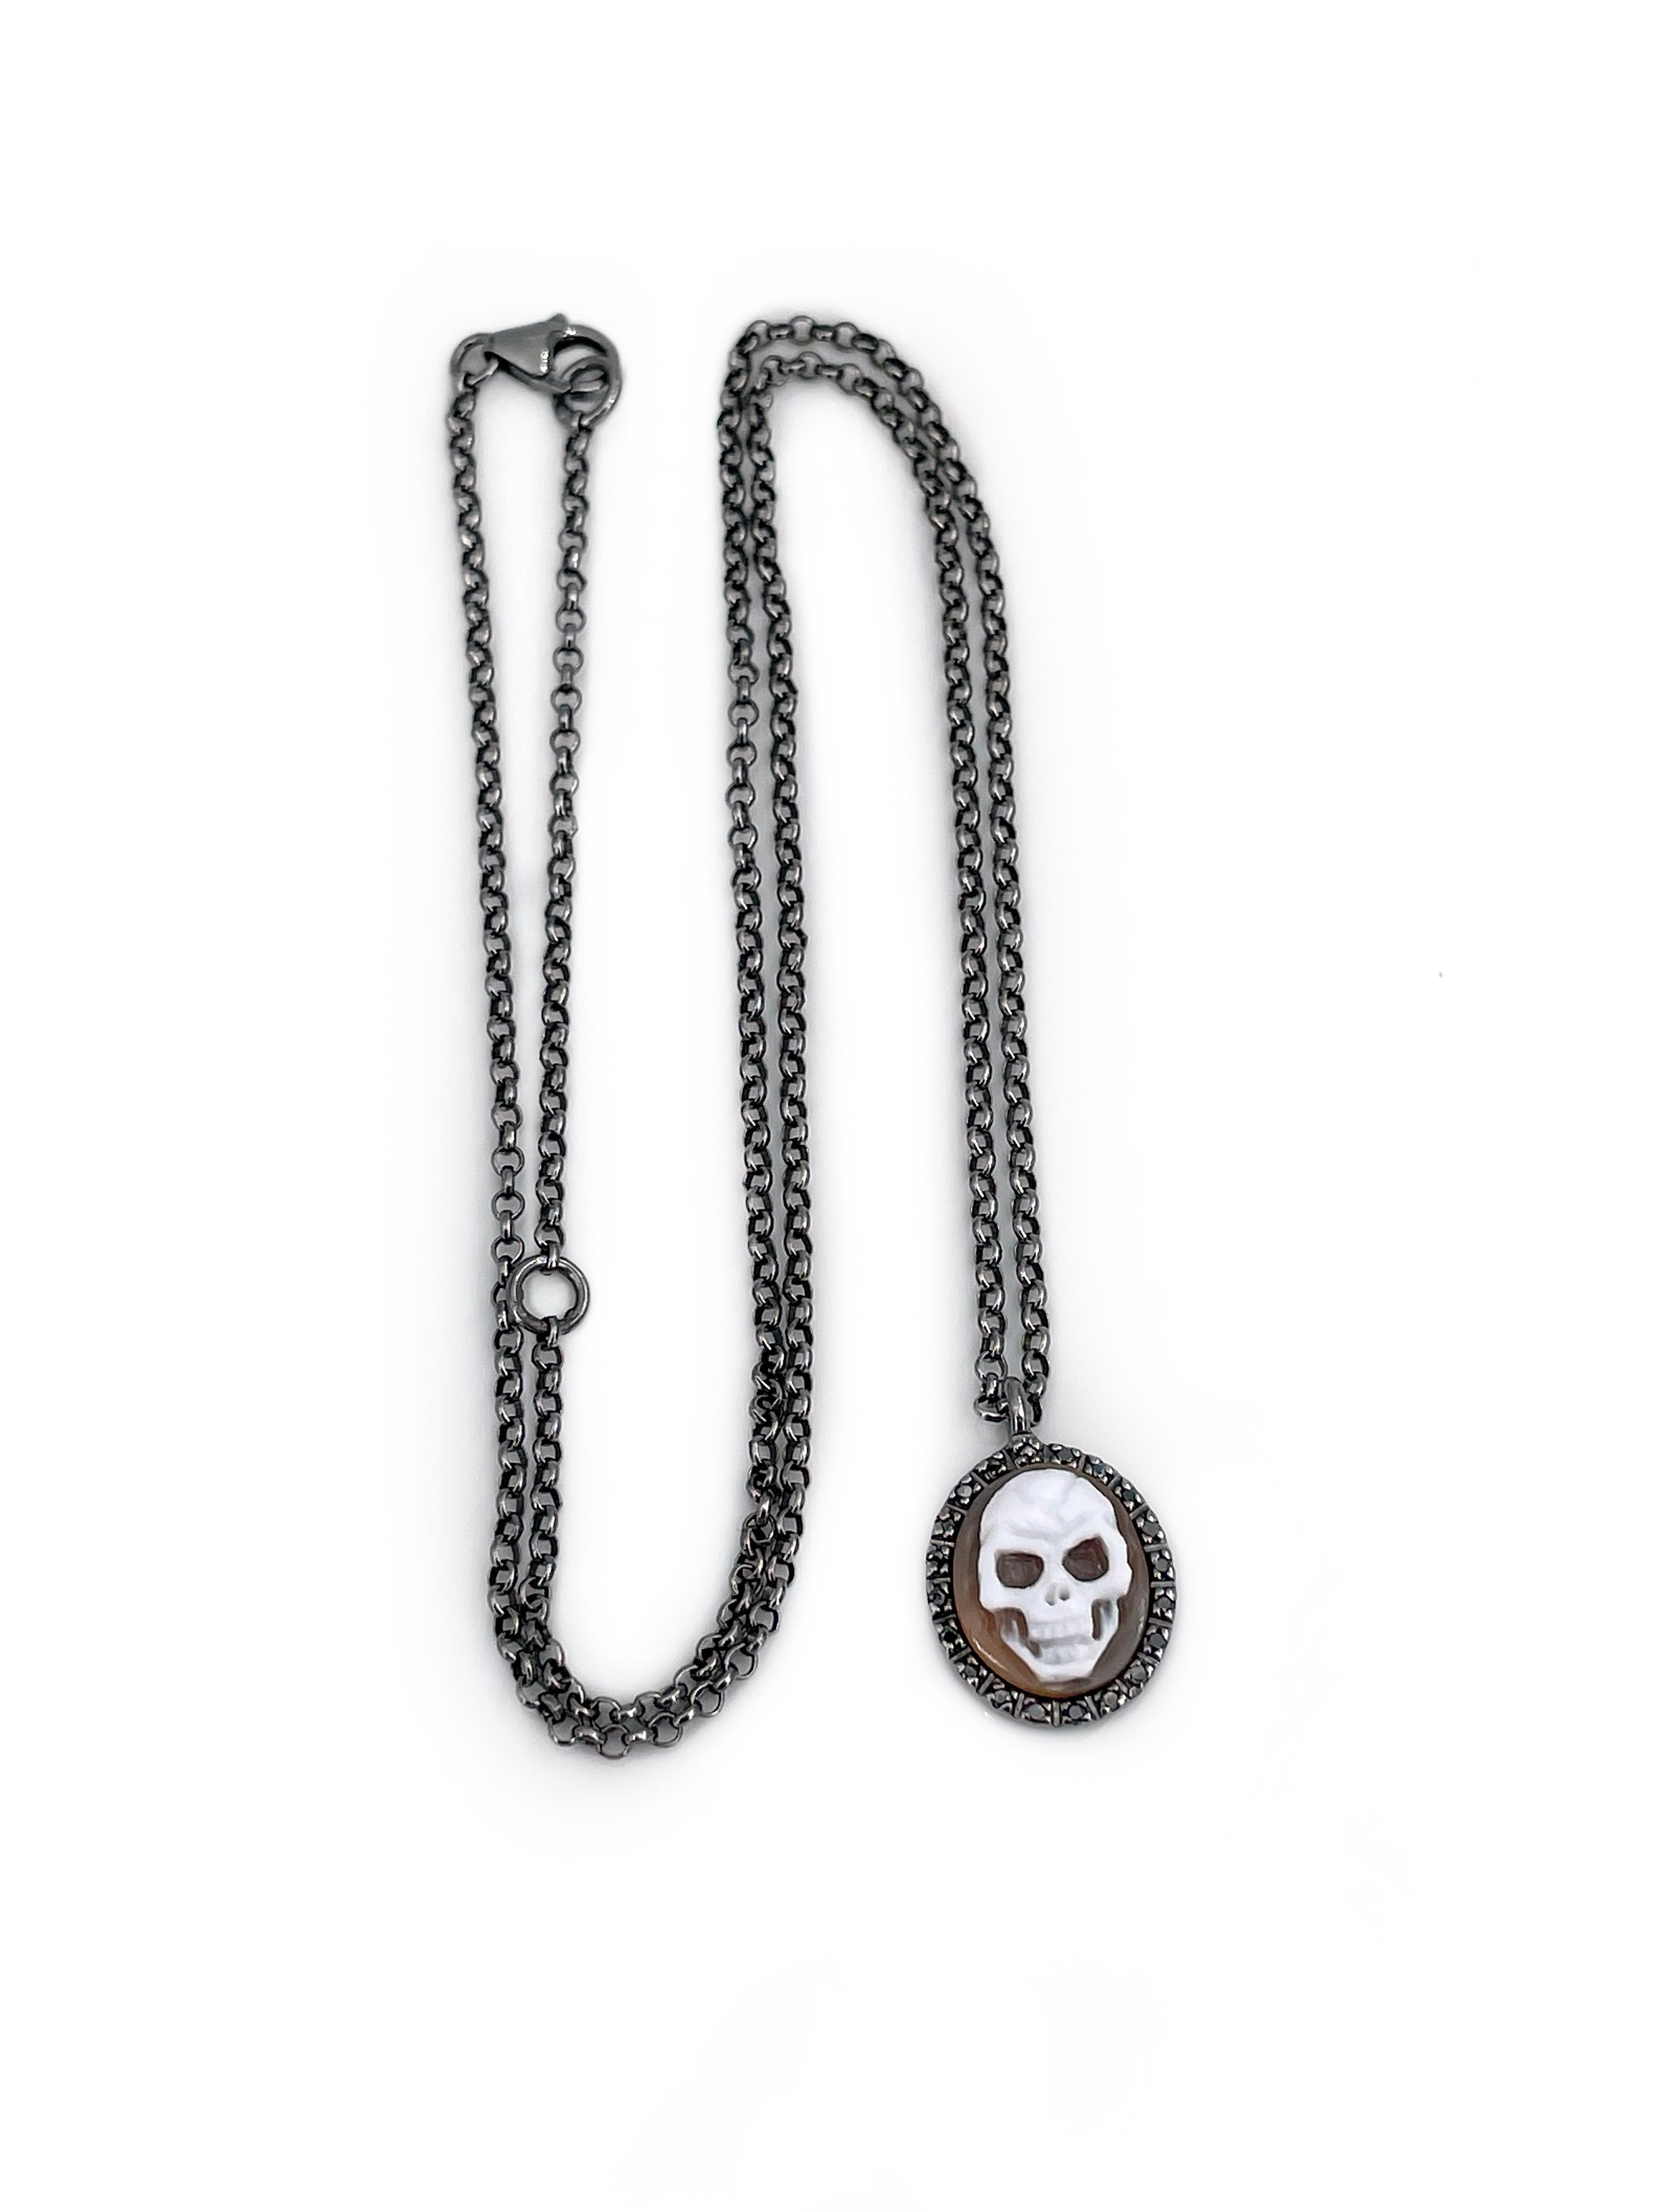 This is an exclusive design pendant necklace designed by Italian jewellery brand Amedeo in 2010s. It is crafted in 925 hallmark blackened silver. The piece features mini shell cameo depicting the skull. It is surrounded with 20 brilliant cut black